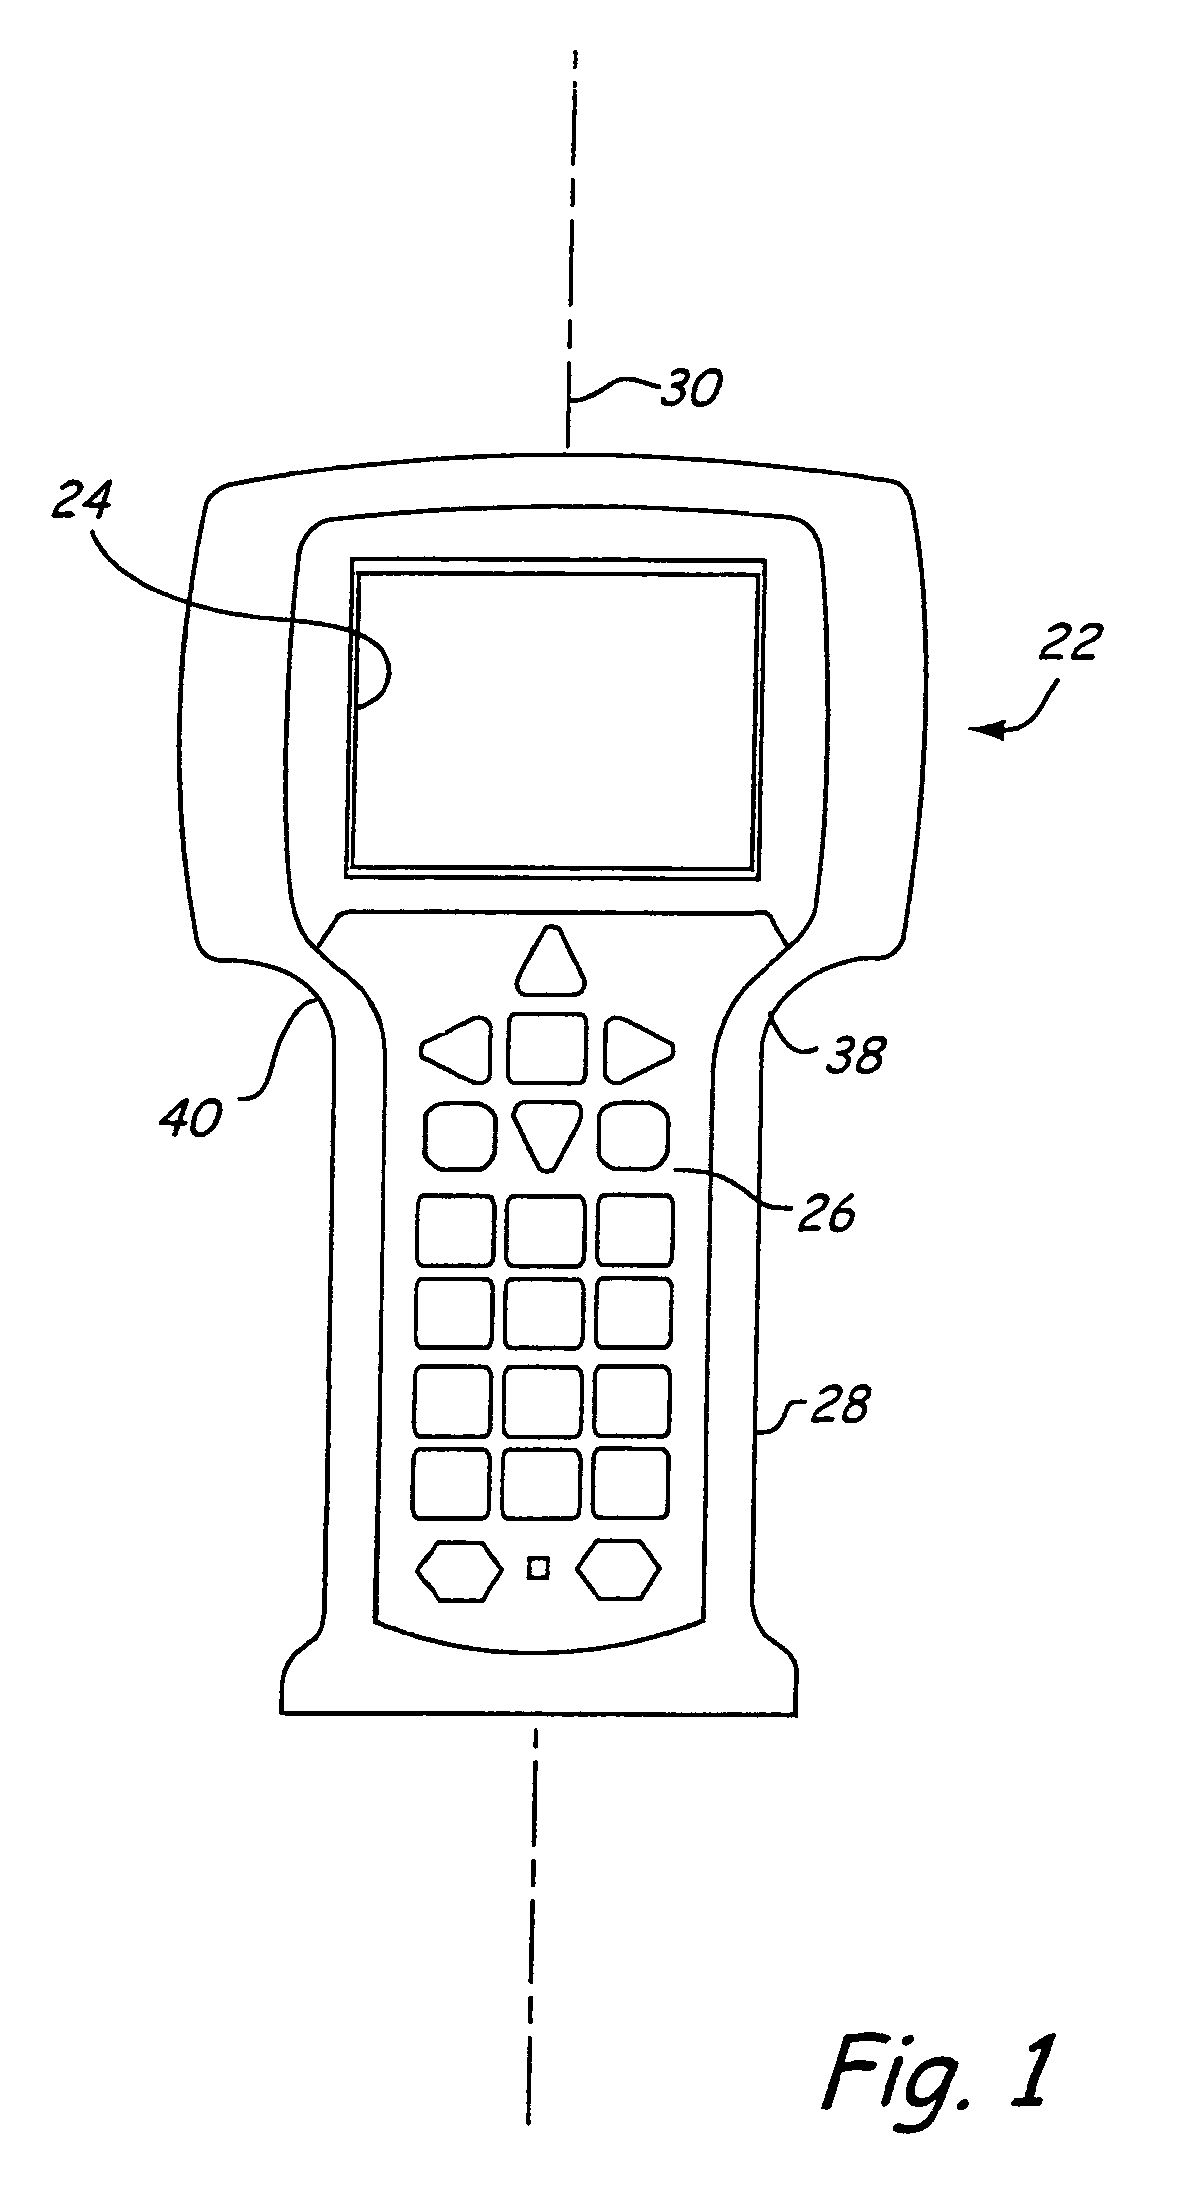 One-handed operation of a handheld field maintenance tool